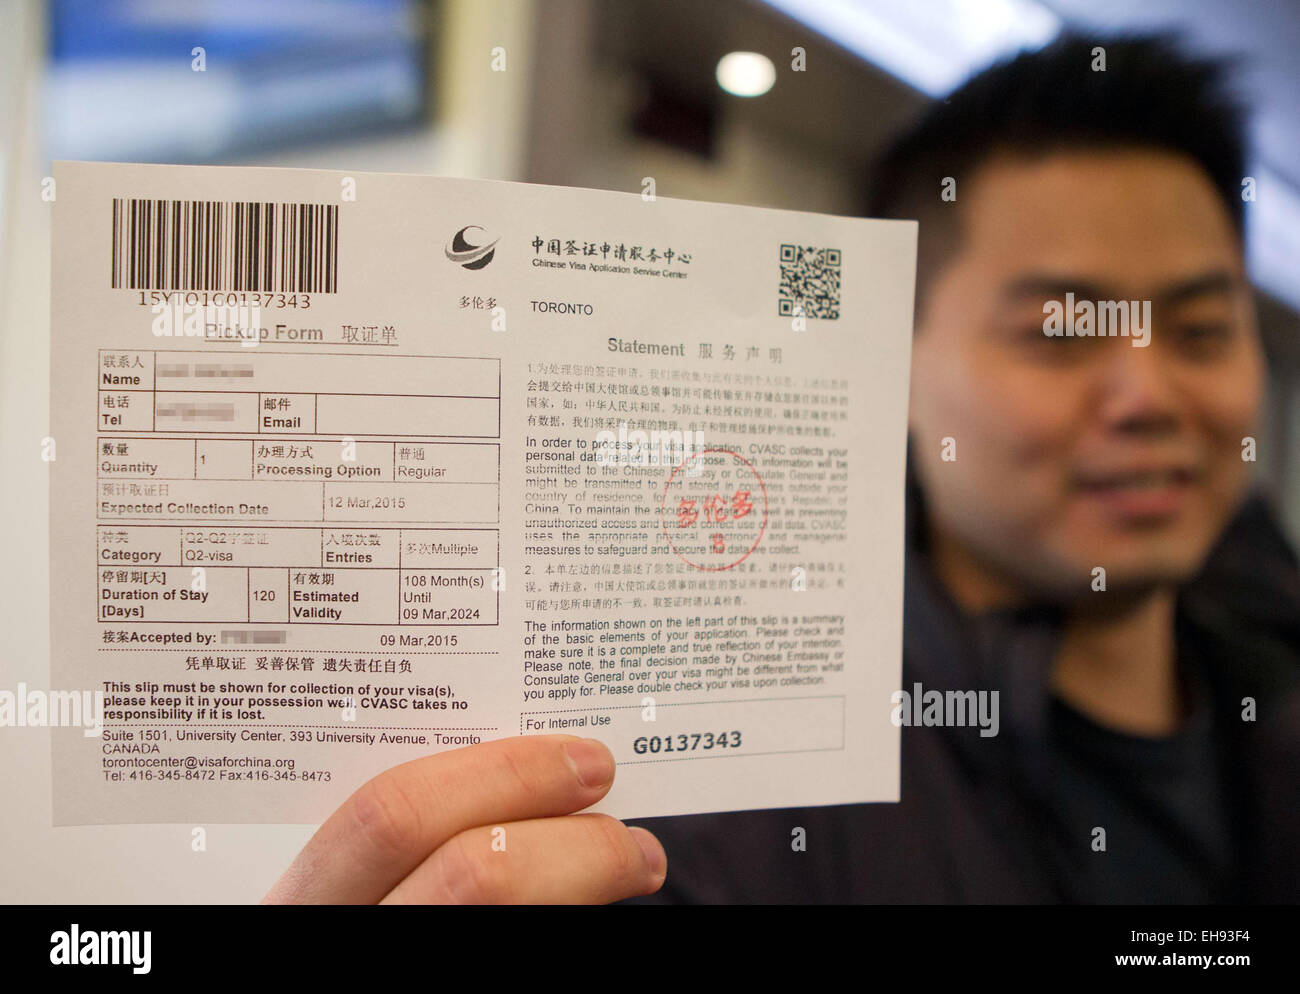 150310)-- TORONTO, March 10, 2015 (Xinhua)-- A man shows the pickup form of  his visa to China at Chinese Visa Application Service Center in Toronto,  Canada, March 9, 2015. Chinese embassy and